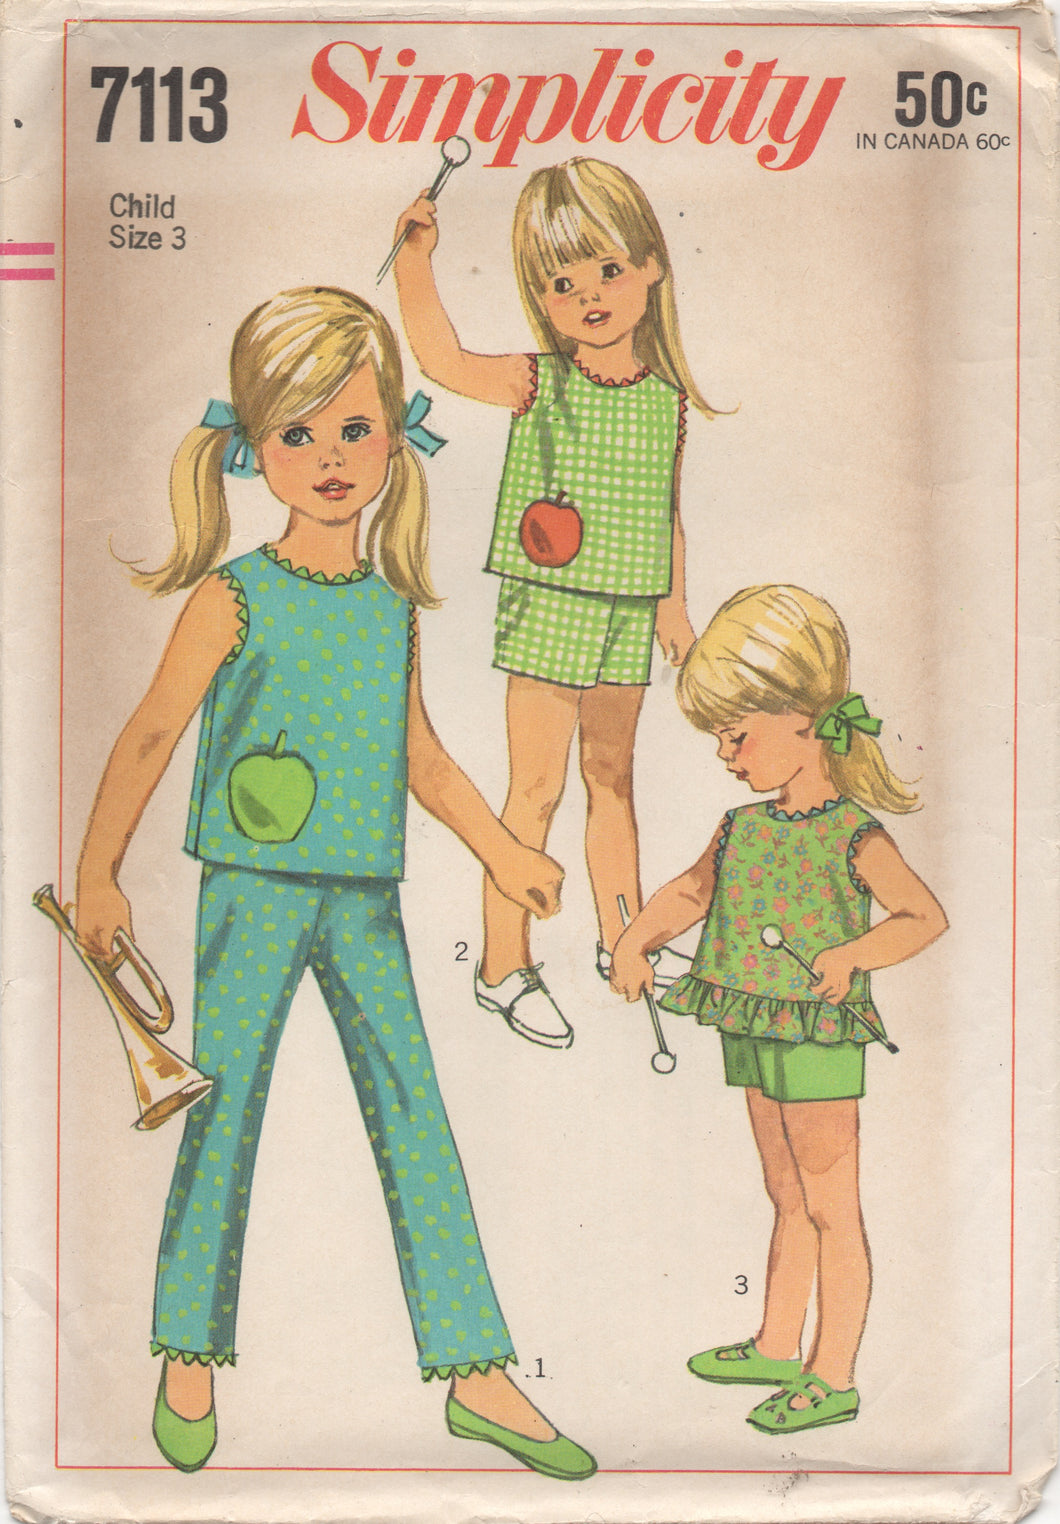 1960's Simplicity Child's Top with Apple Pocket and Pants or Shorts - Size 3 - No. 7113